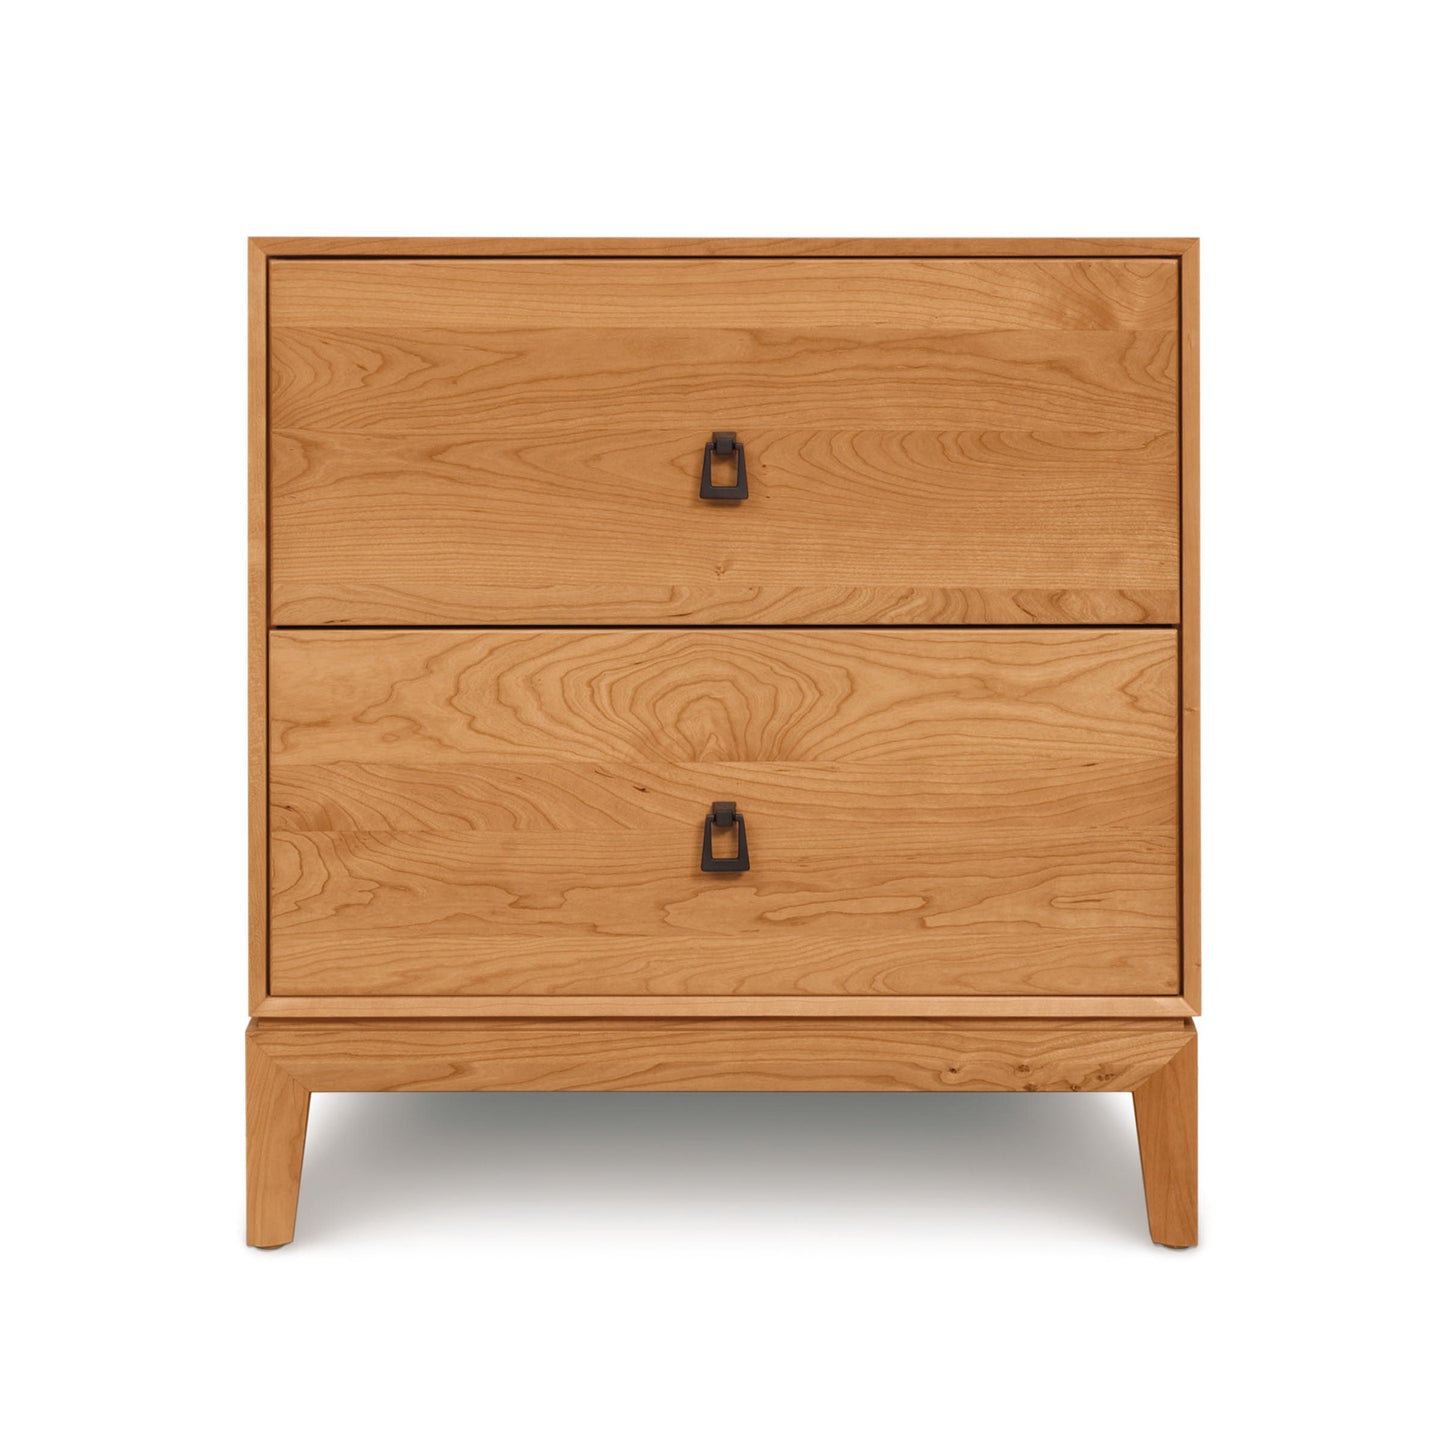 A Mansfield 2-Drawer Nightstand from Copeland Furniture featuring a mitered frame and black bronze ring pulls.